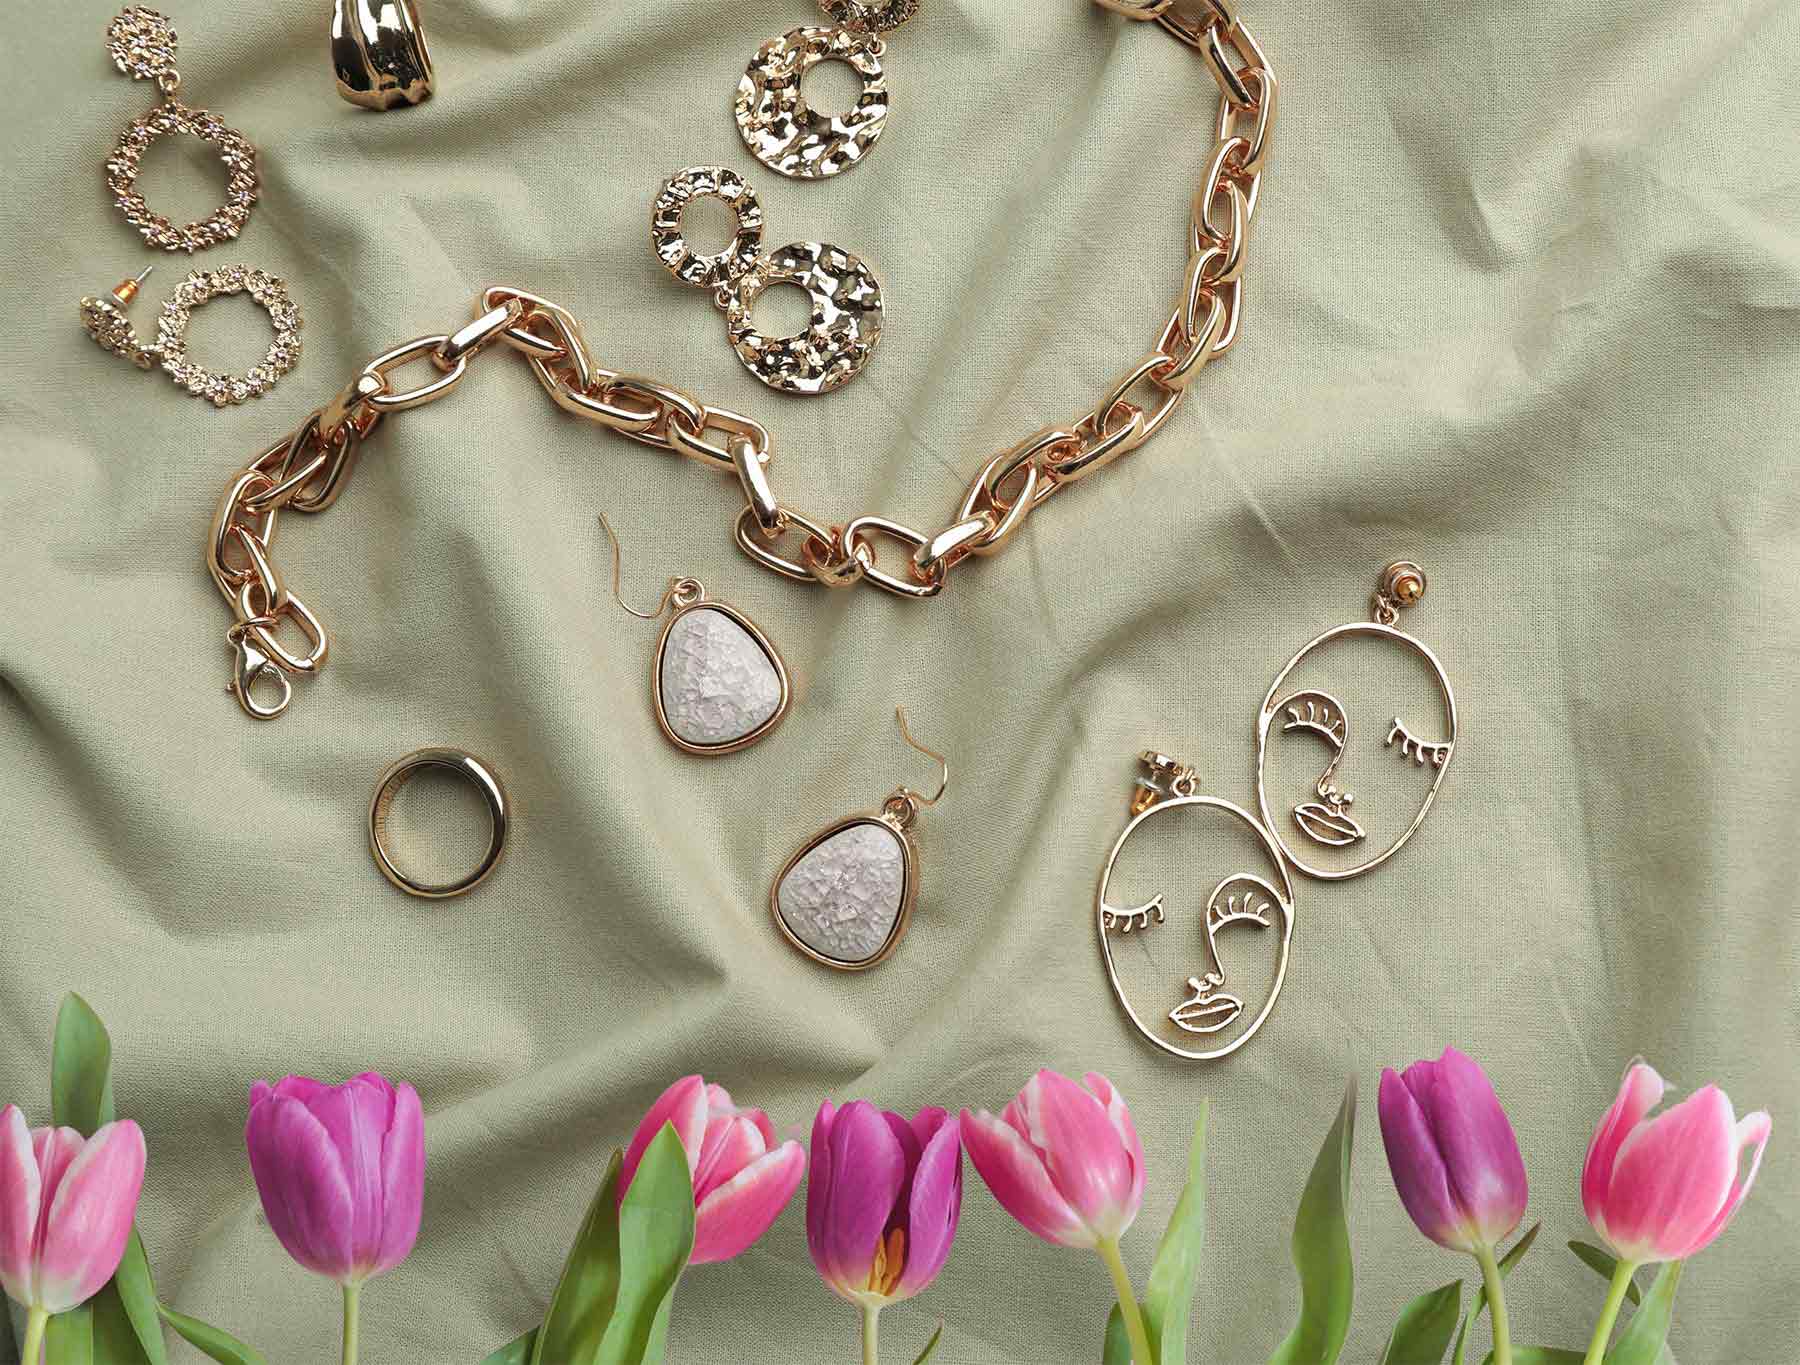 Refresh and Repair Your Jewlery for Spring